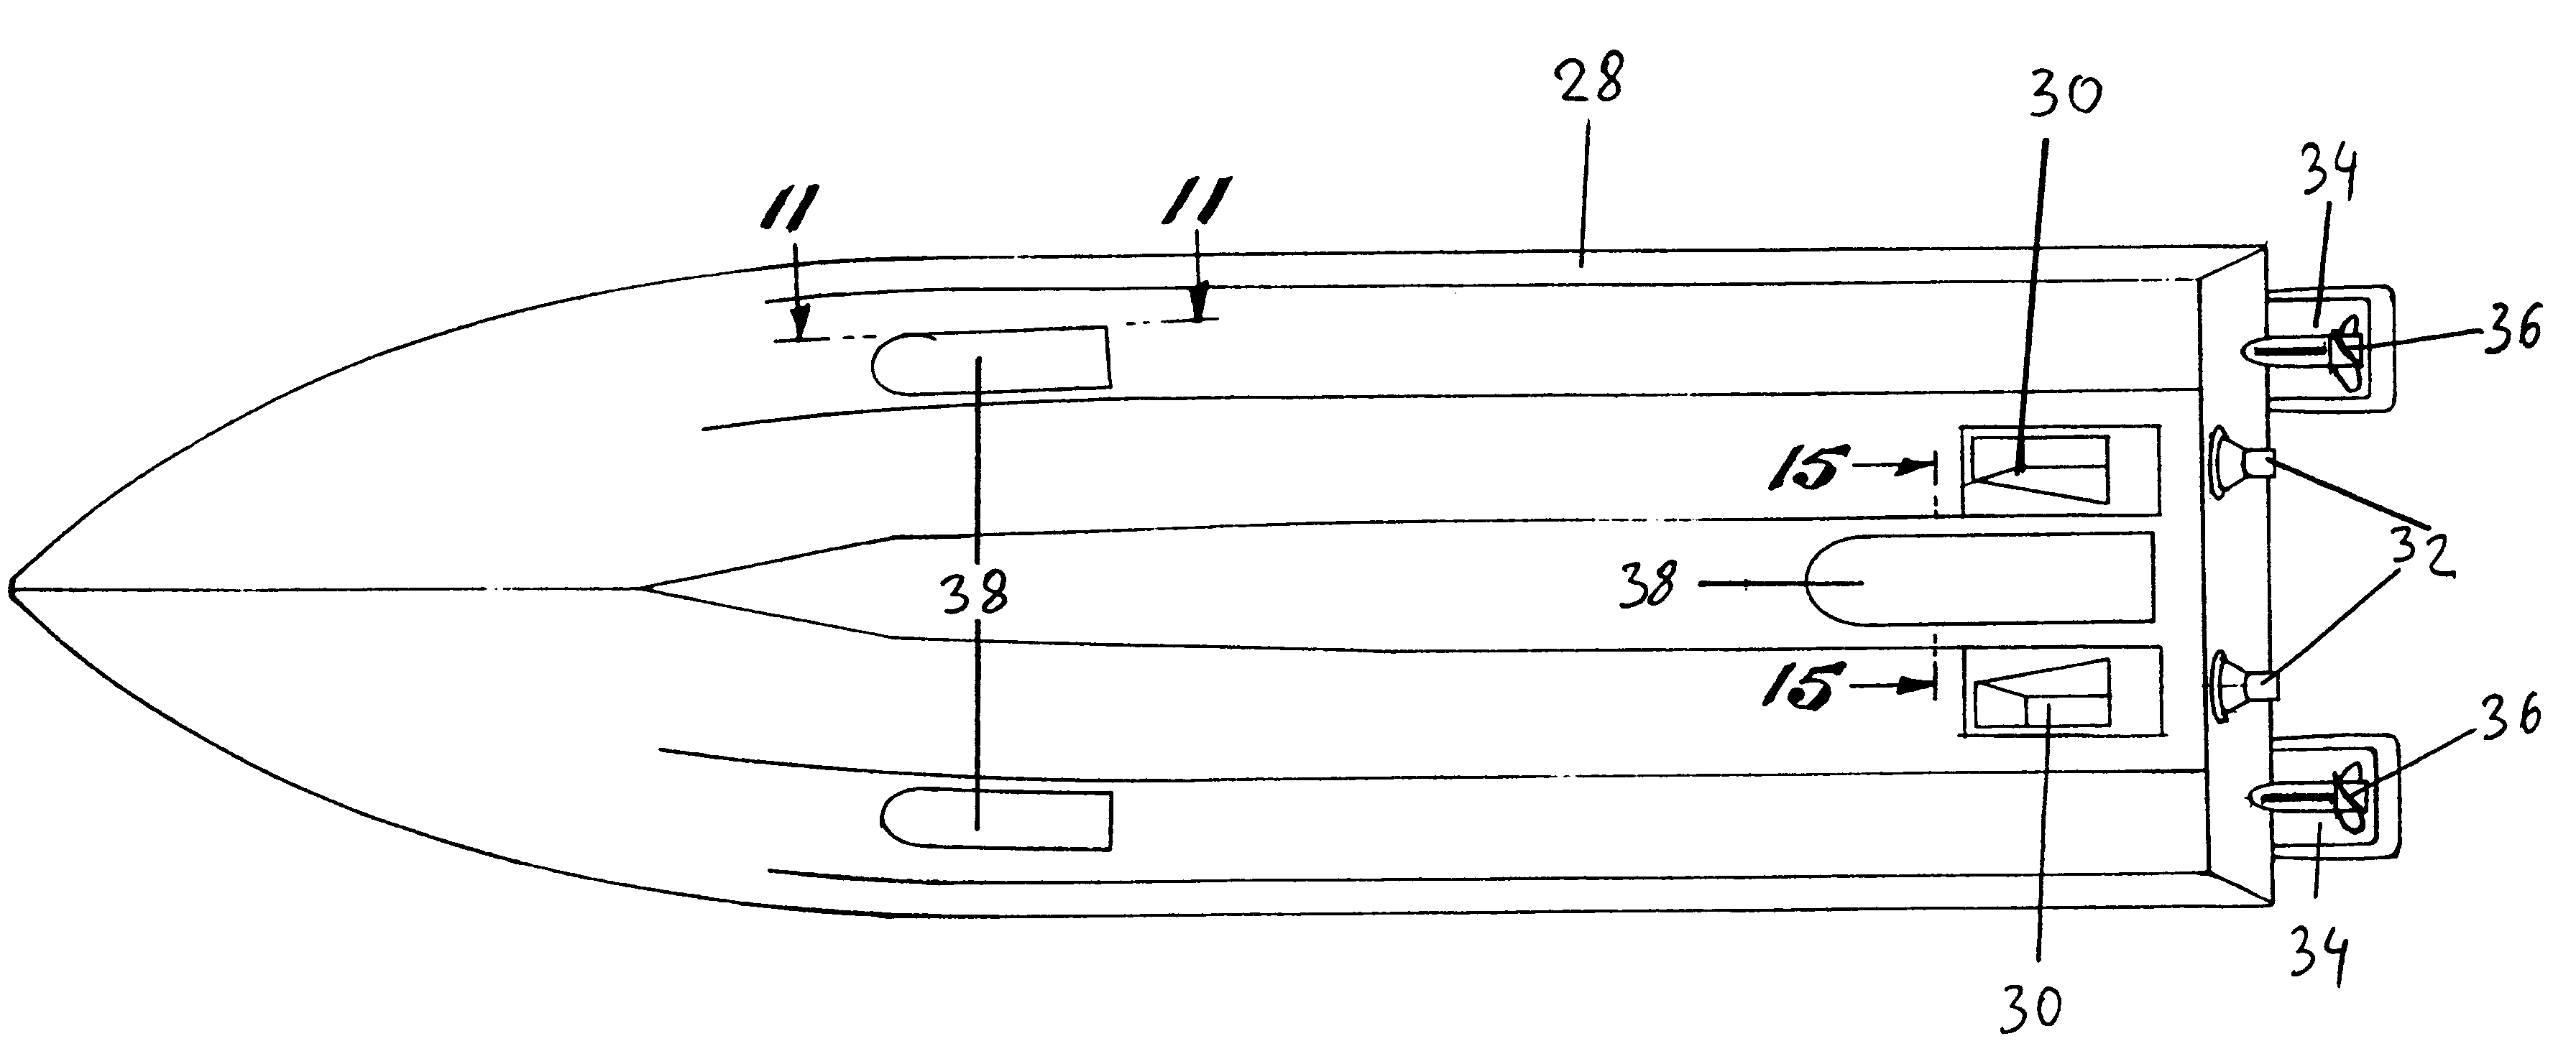 Boat having a combination of jets and outboard motors and/or extendable hydroplanes